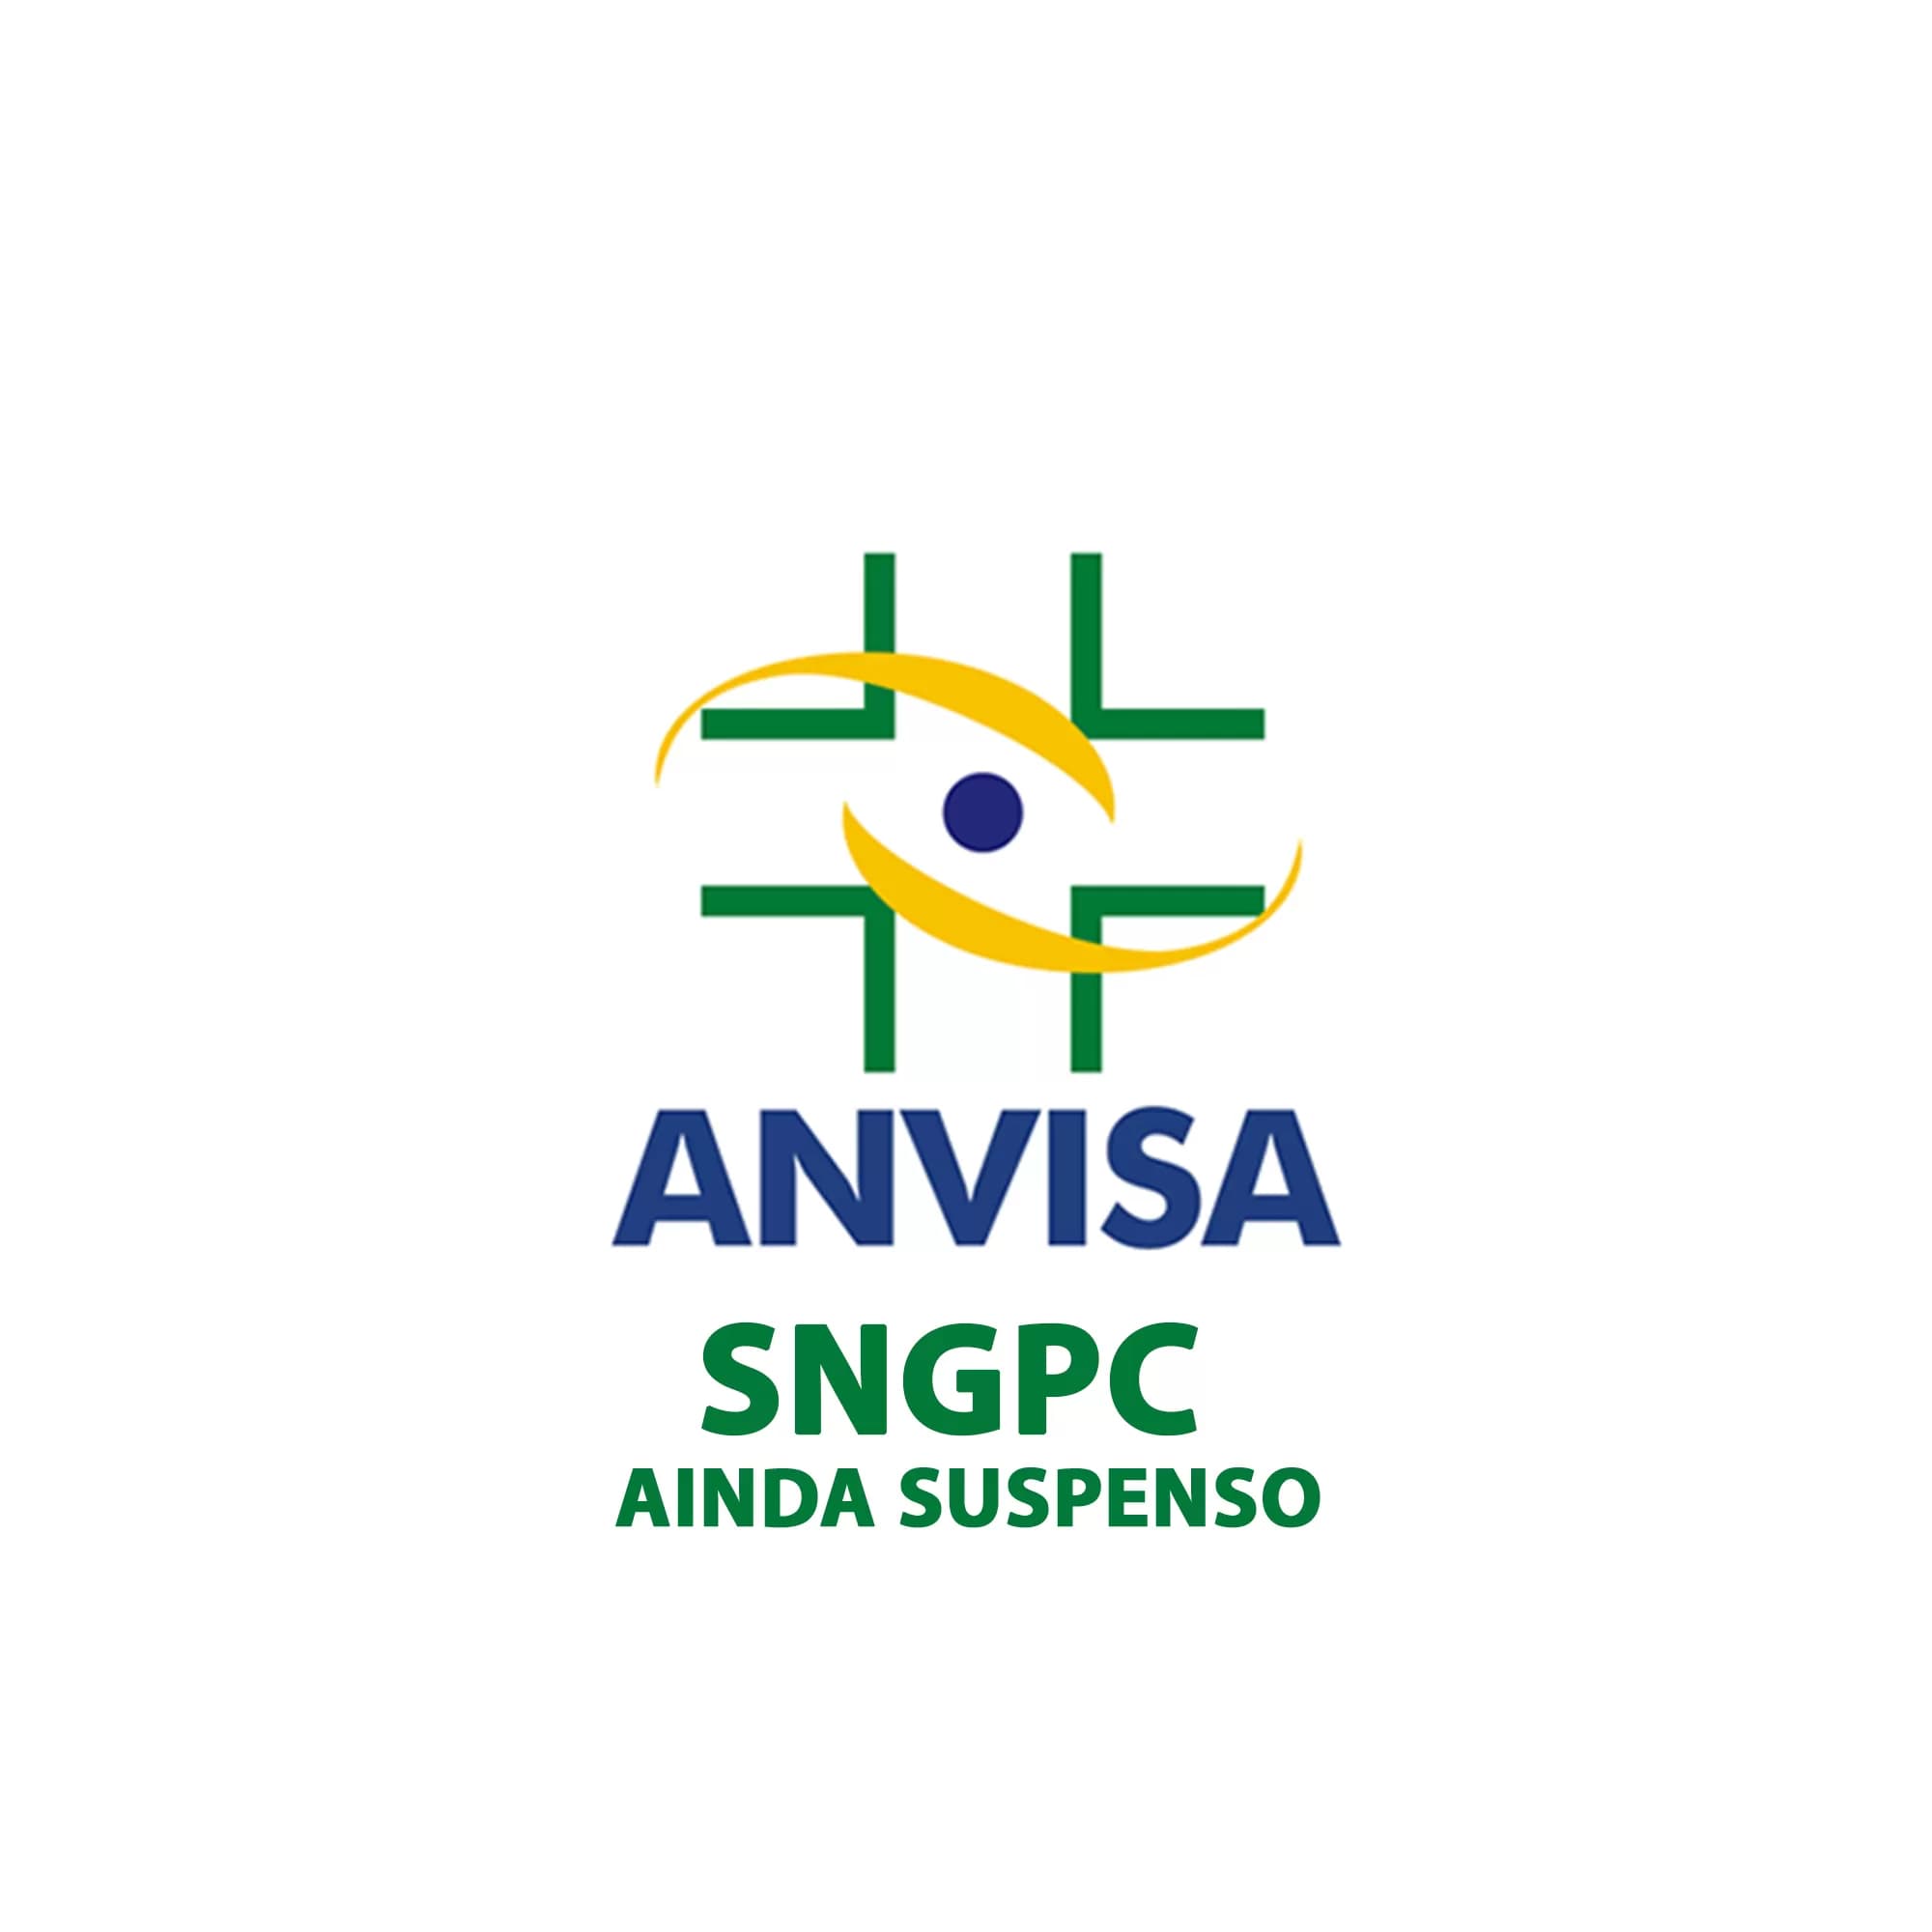 Mastering Error-Free and Delay-Free XML Submissions to ANVISA